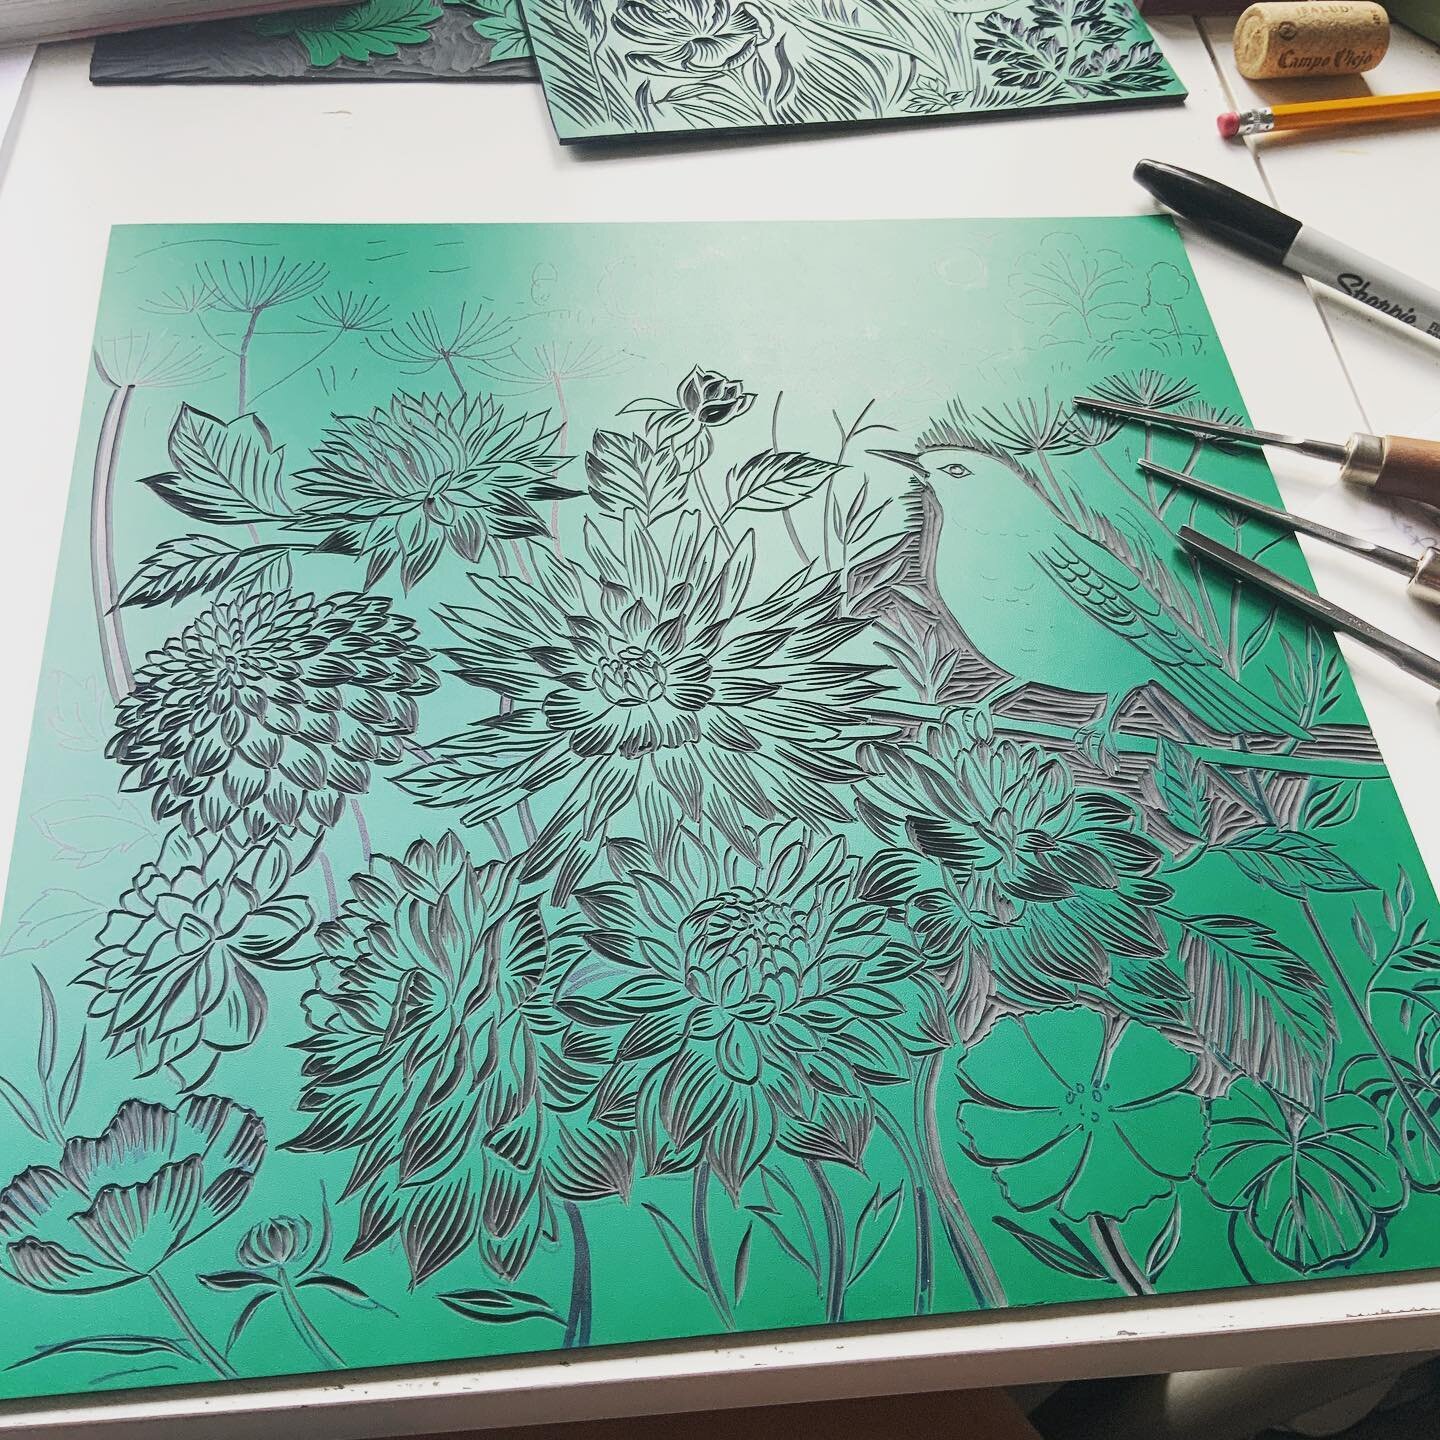 Slowly getting there with the dahlia print. 

Managed to cut my fingers three times today so far! 
.
.
.
#linocut #wip #lino #printmaker #print #artistsofinstagram #printmakersofinstagram #analogueart #popmember #womenofprint #blockprinting #linocut 